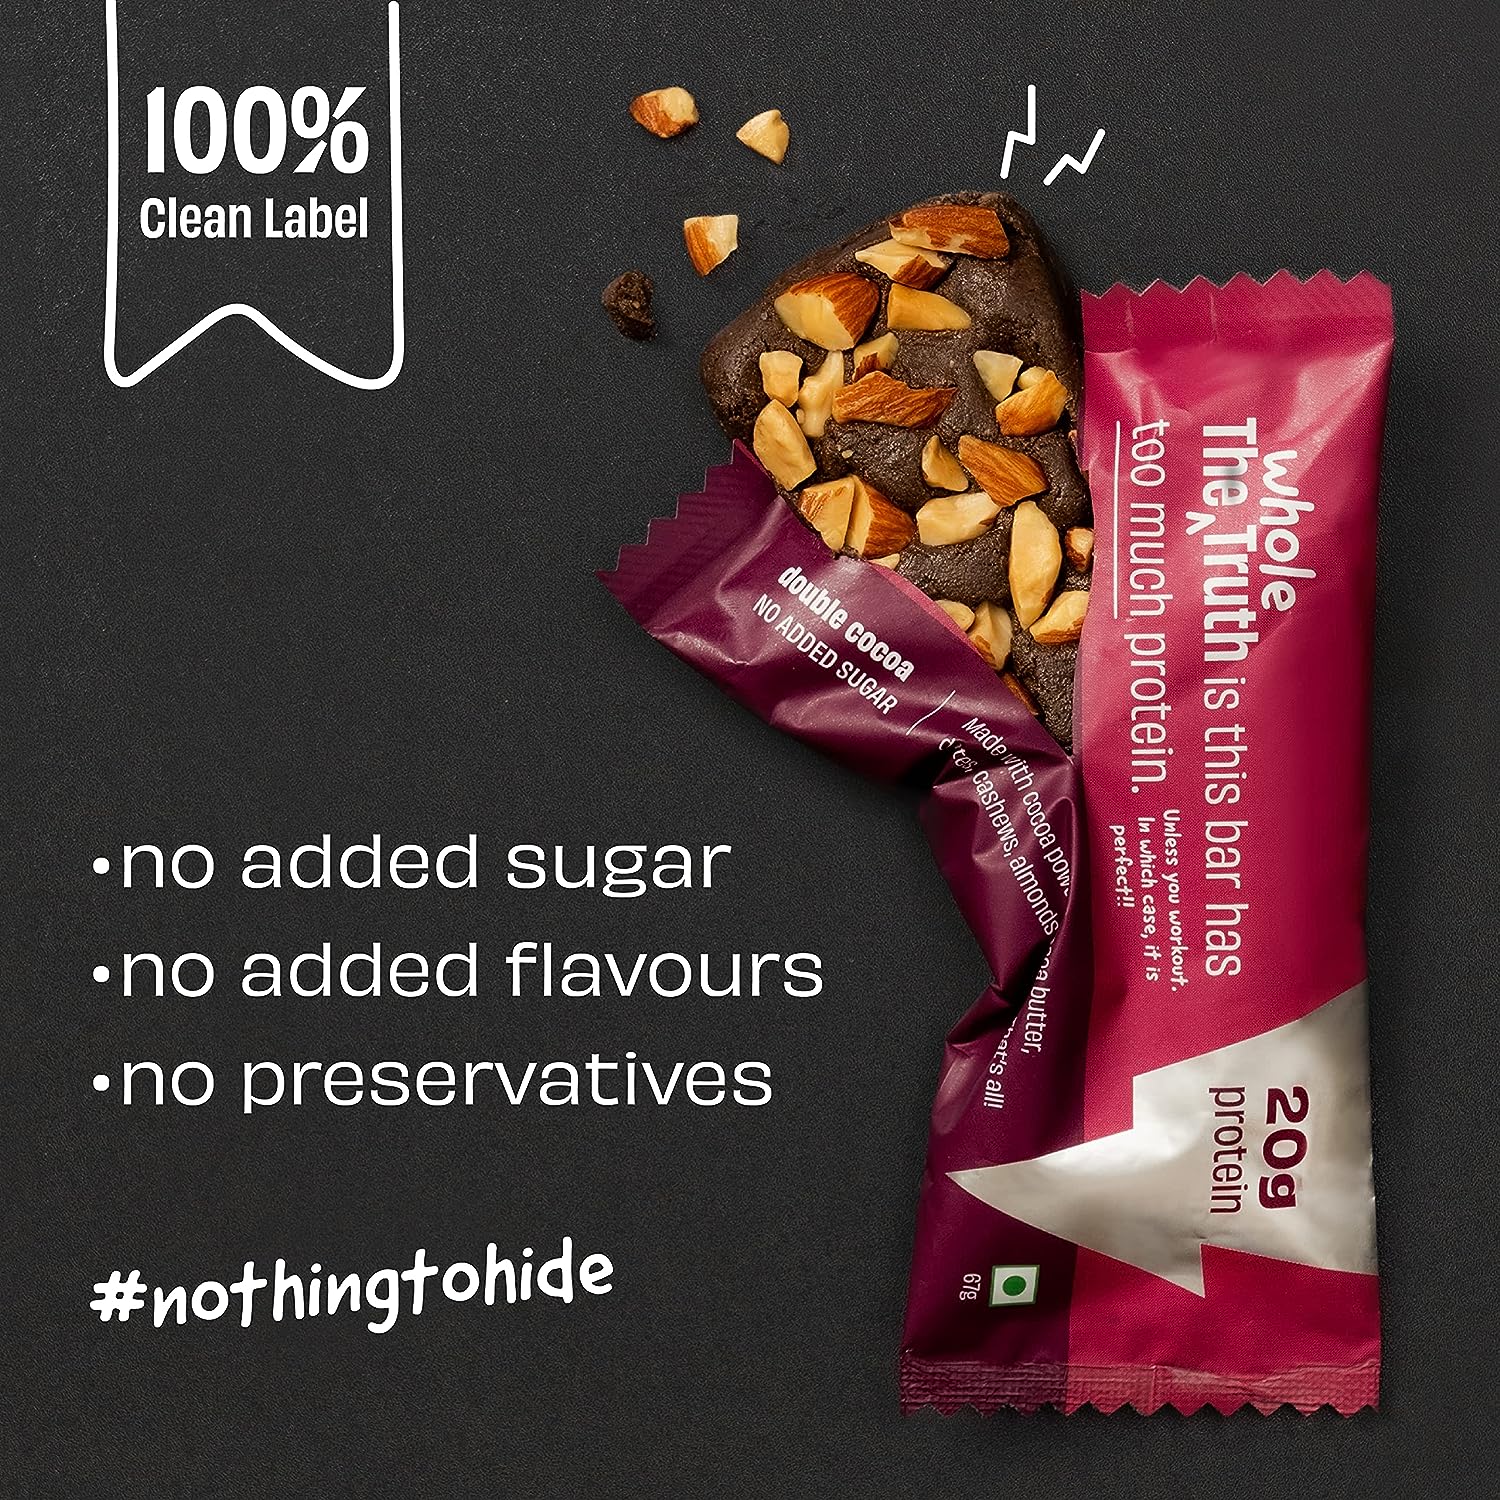 The Whole Truth - High Protein All in One 20g Protein Bar - Pack of 5 x 67g each - No Added Sugar - No Preservatives - No Artificial Flavours - All Natural